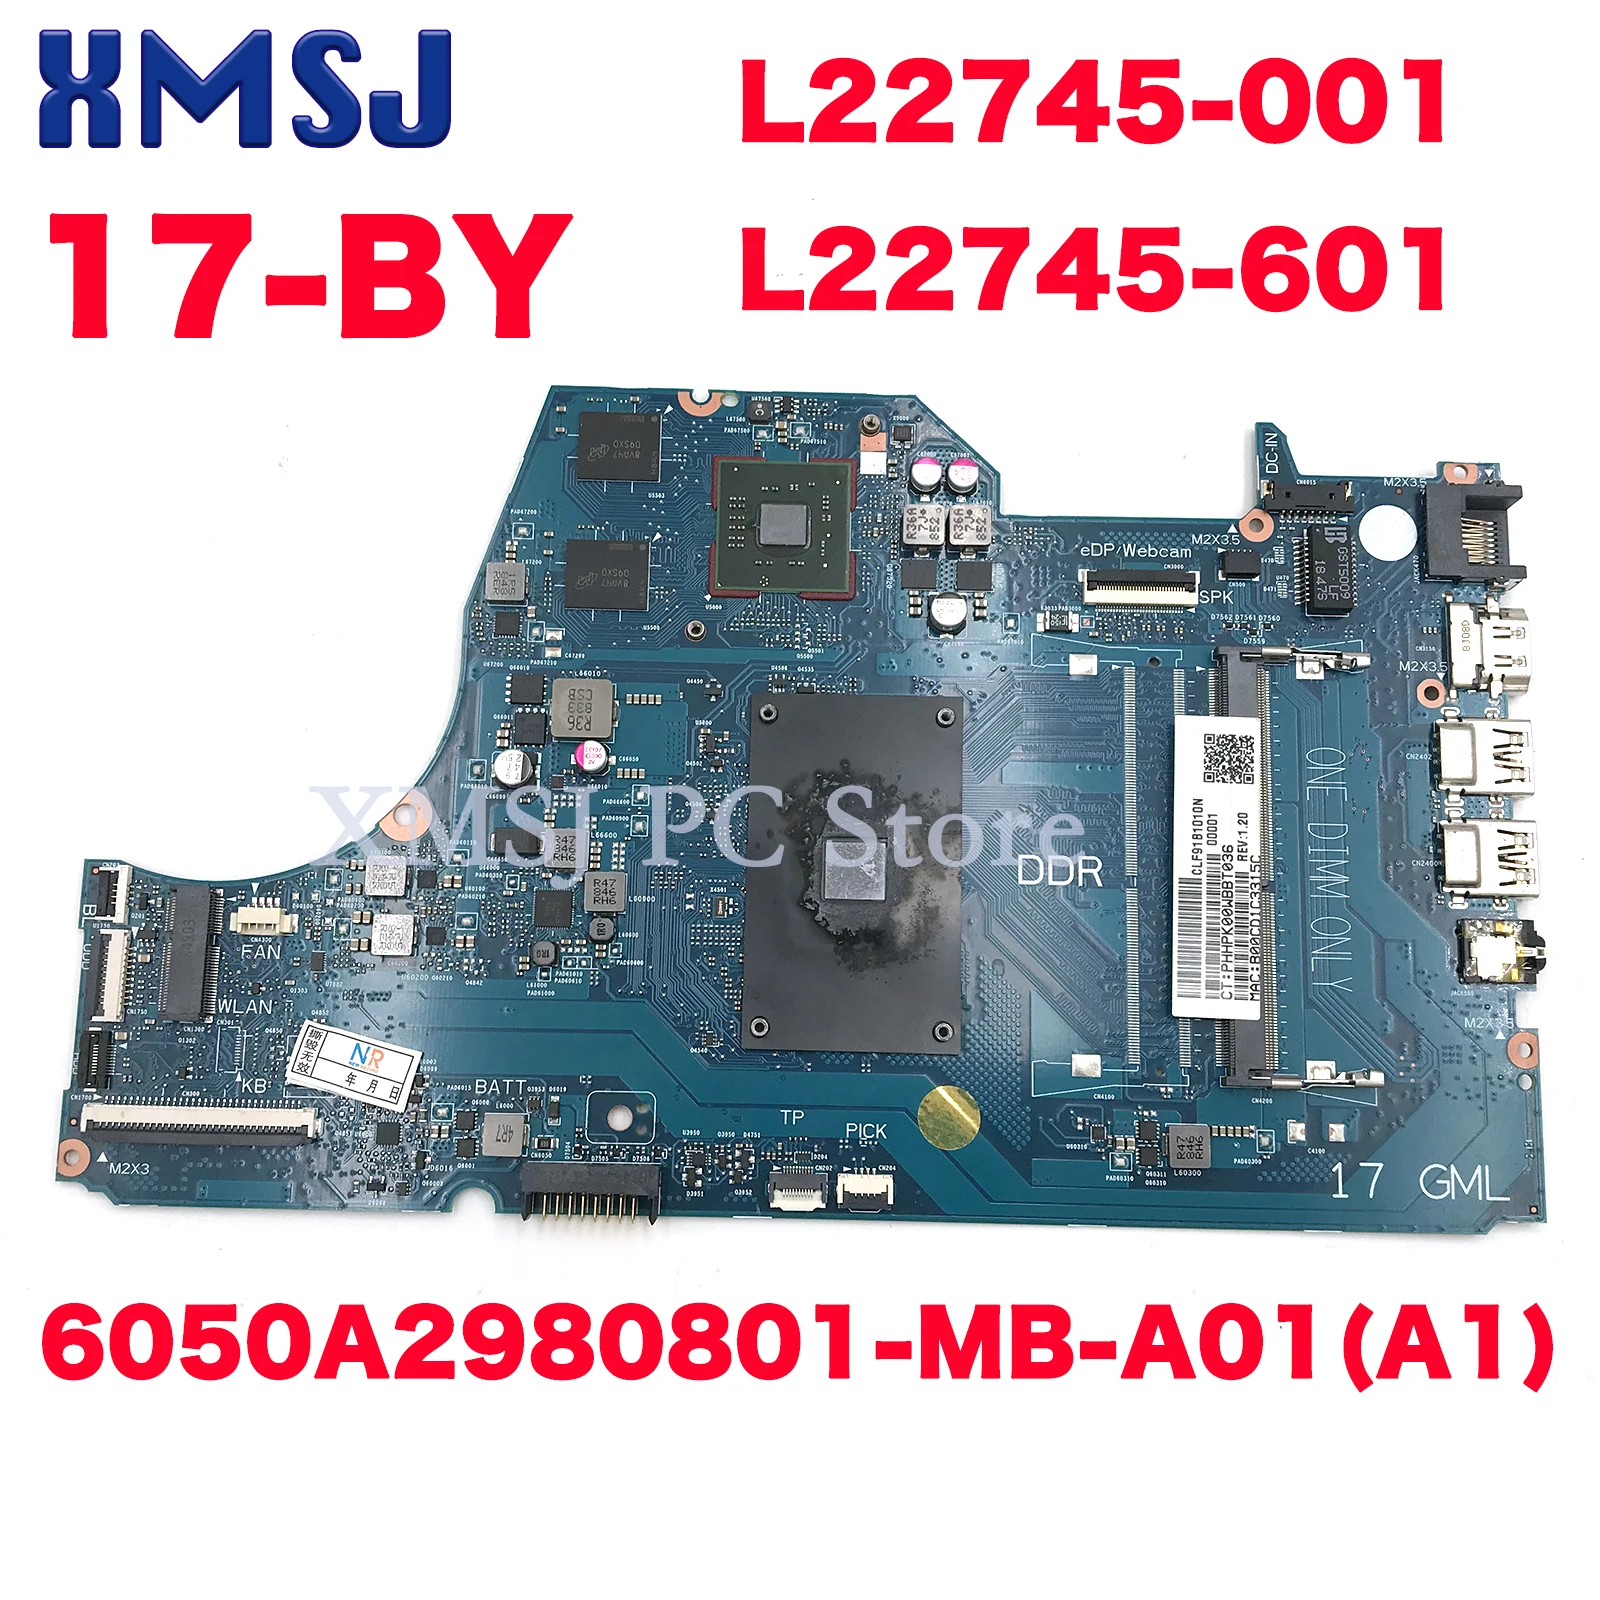 

XMSJ FOR HP Pavilion 17-BY 6050A2980801-MB-A01(A1) L22745-001 L22745-601 Notebook Motherboard N4000/N5000CPU M520 2G GPU DDR4